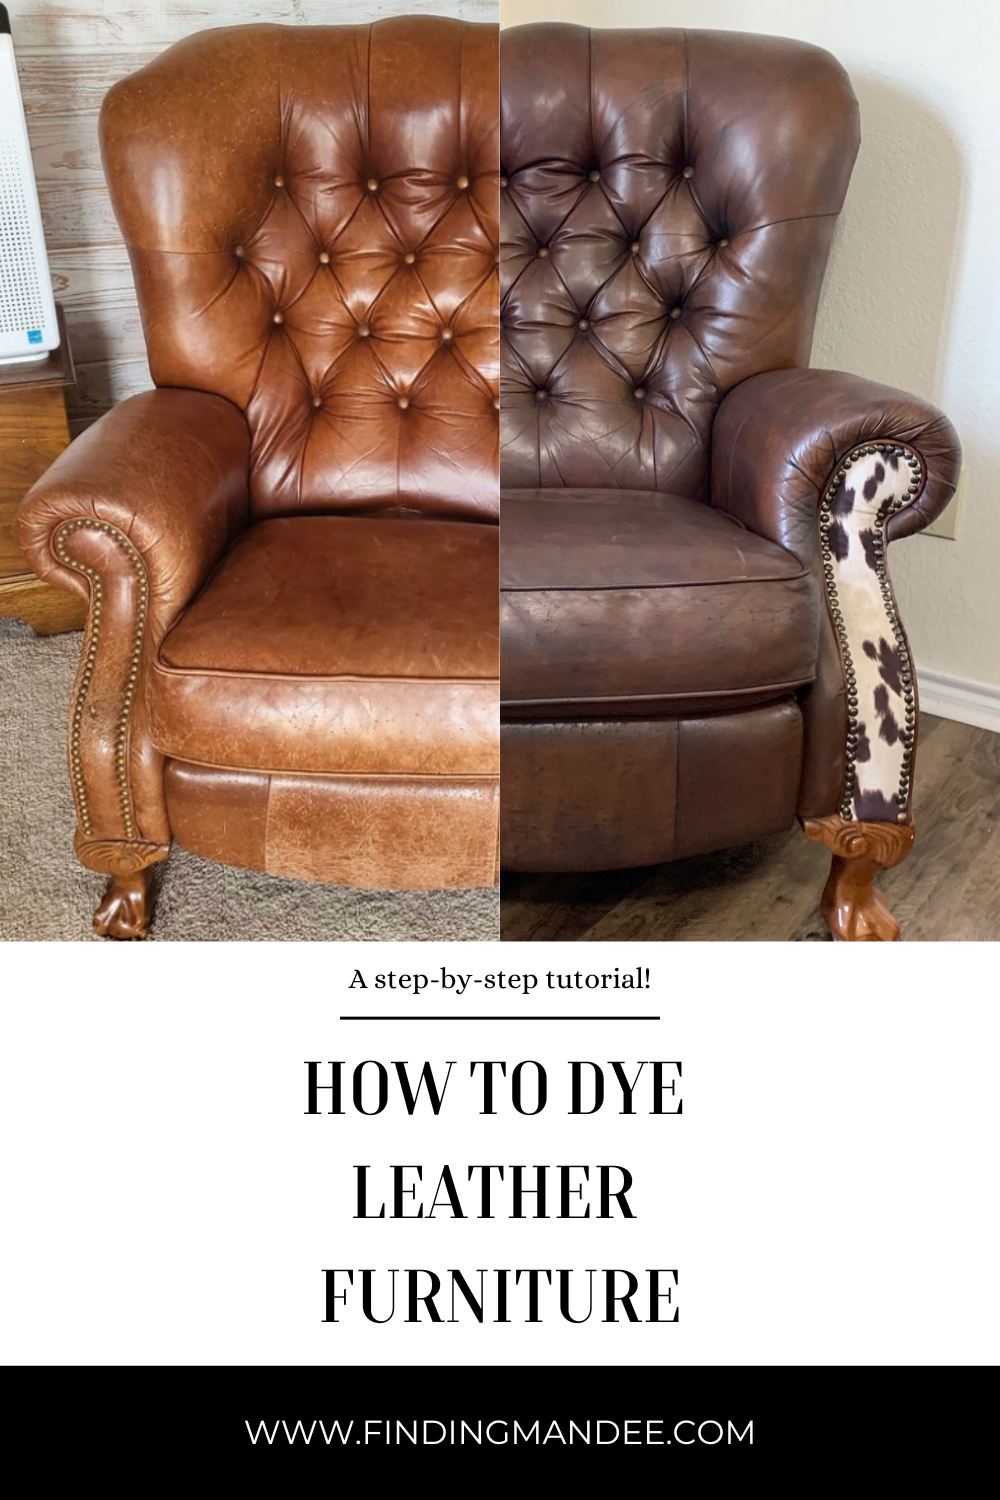 How to Dye Leather Furniture to Make It Look New Again | Finding Mandee